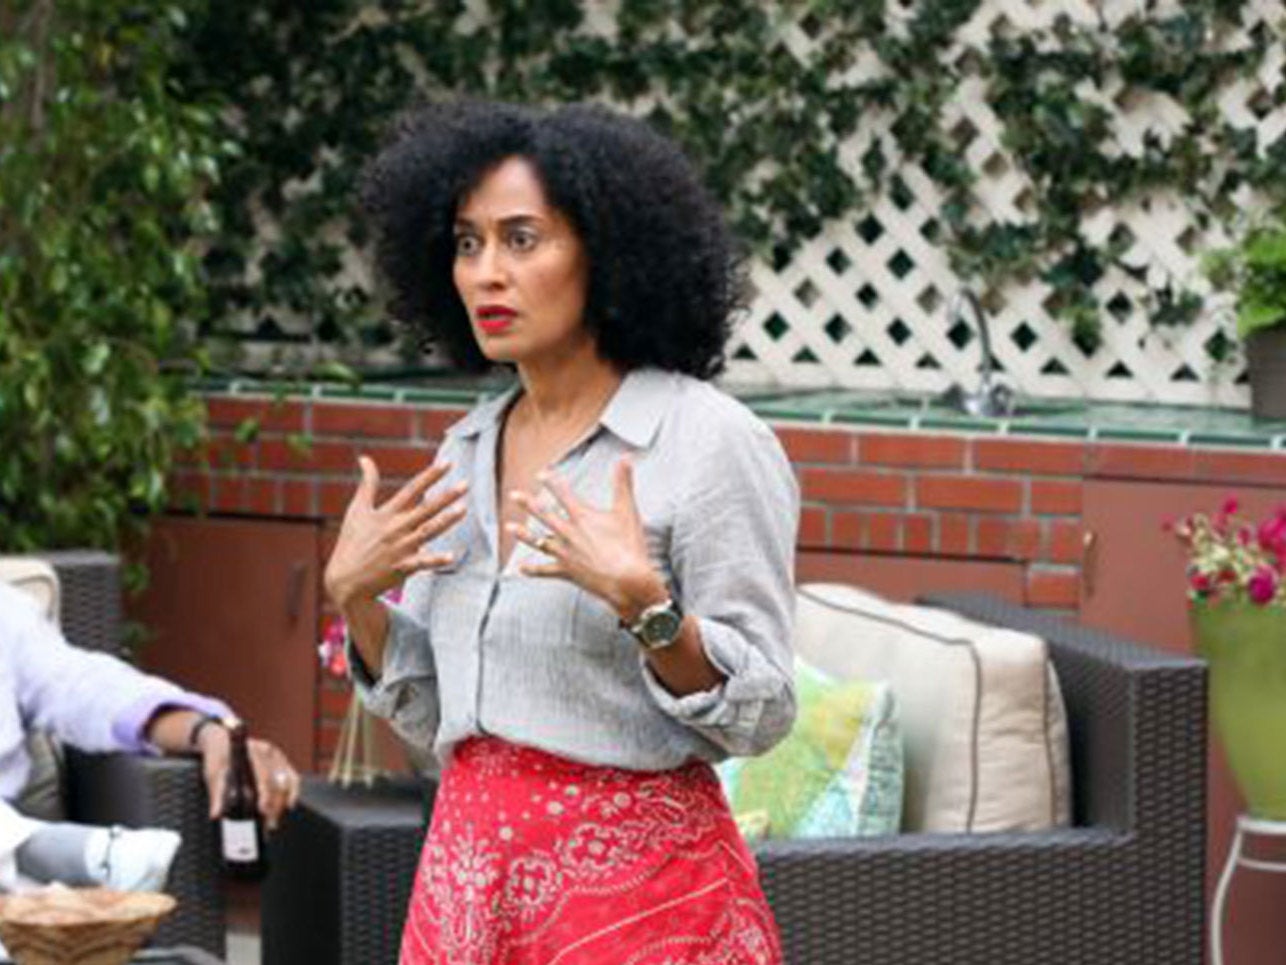 Black-ish is the first African-American sitcom in the US for a while